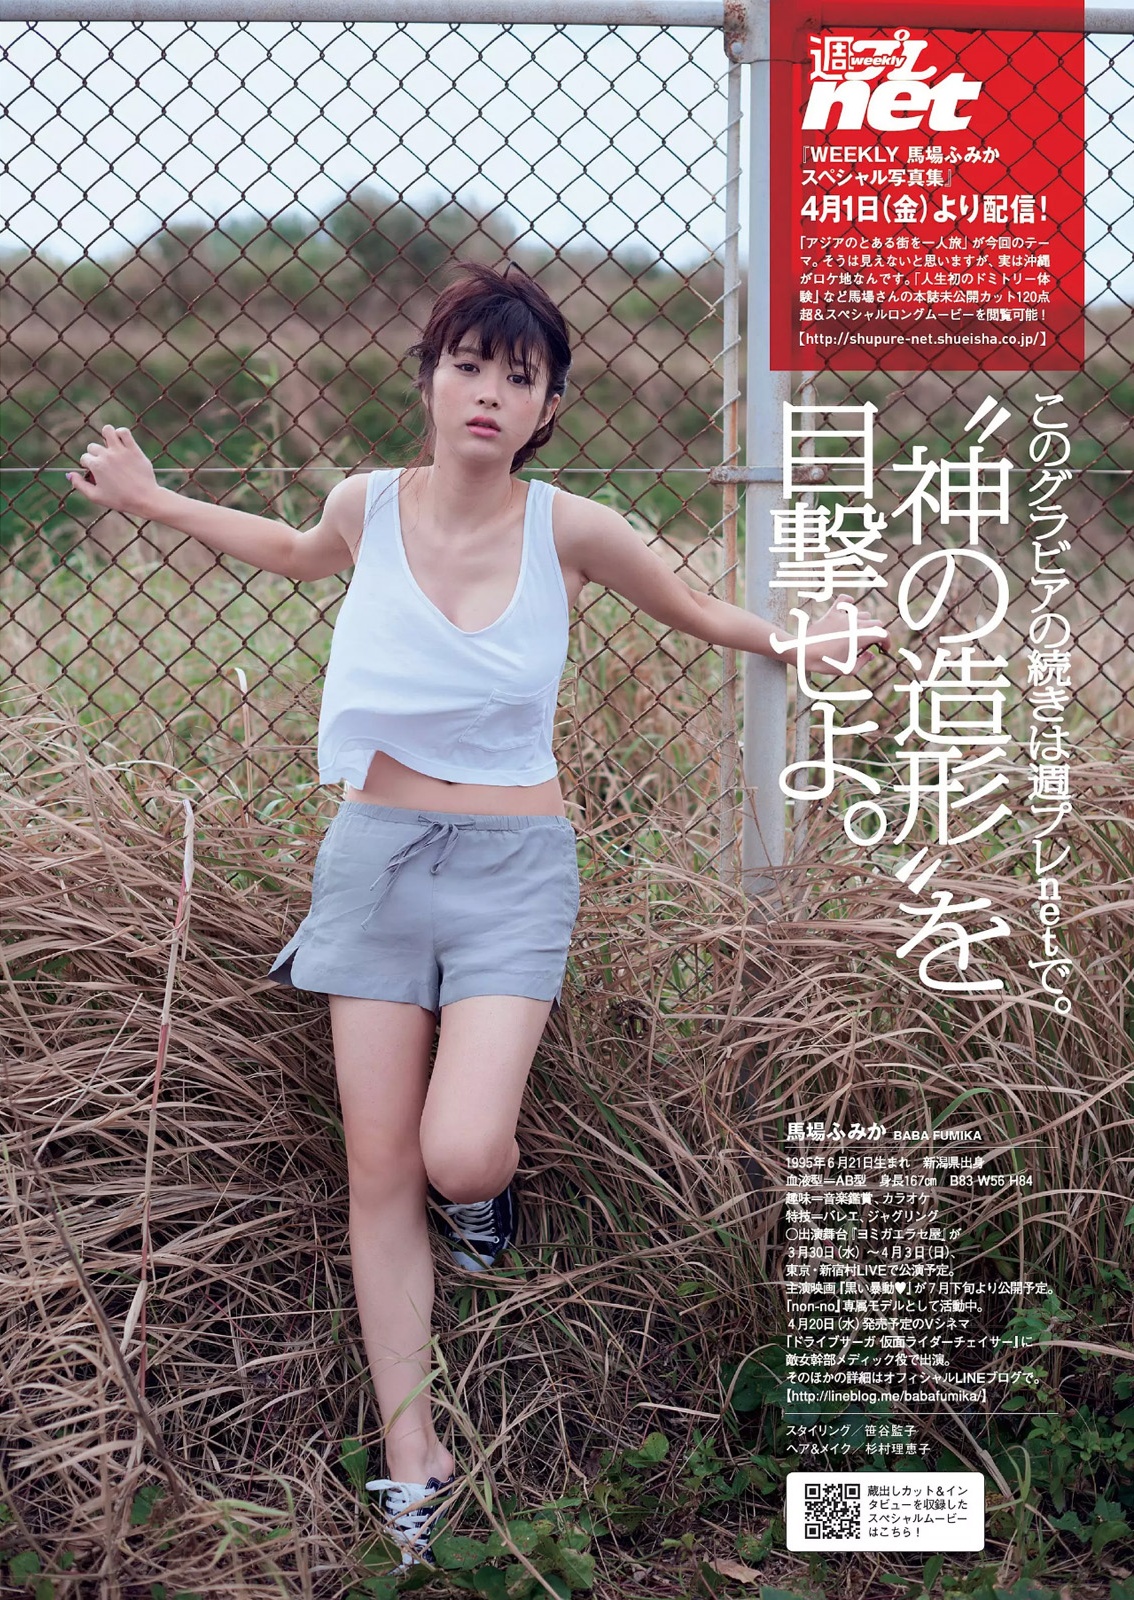 Weekly Playboy 2015-37 바바 후미카